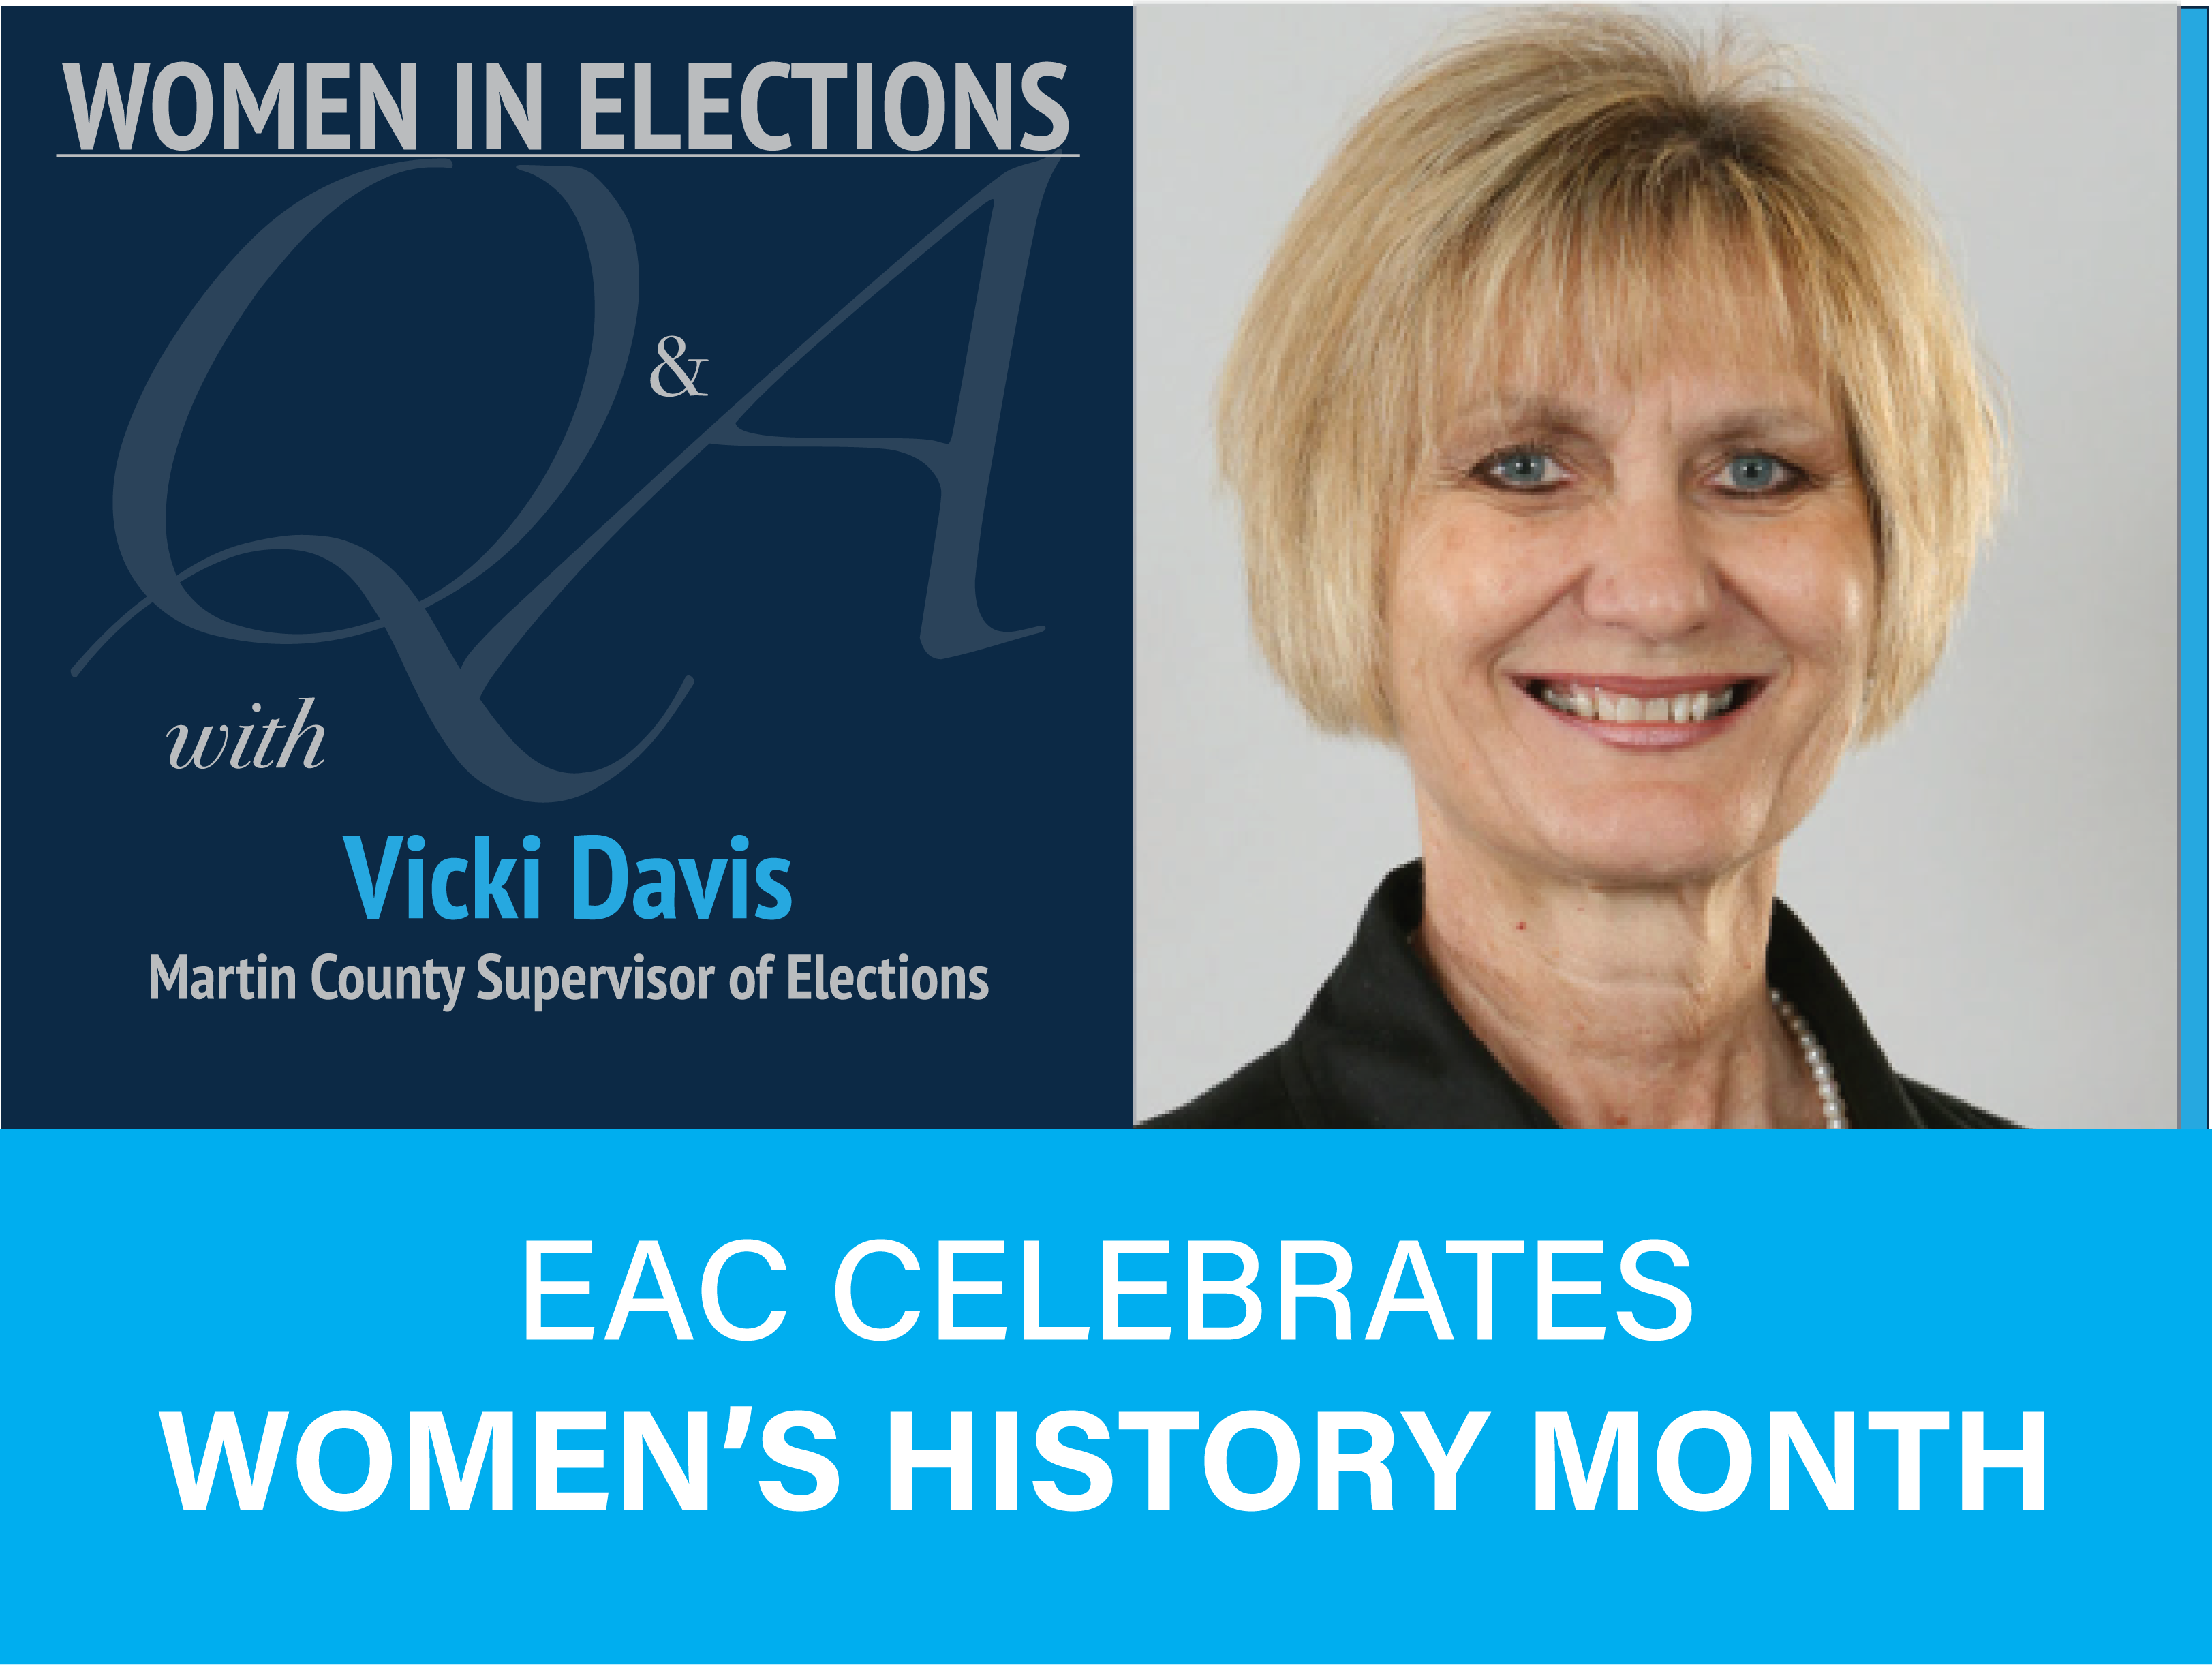 Women in Elections Q and A Series with Vicki Davis Martin County Supervisor of Elections. EAC Celebrates Women's History Month